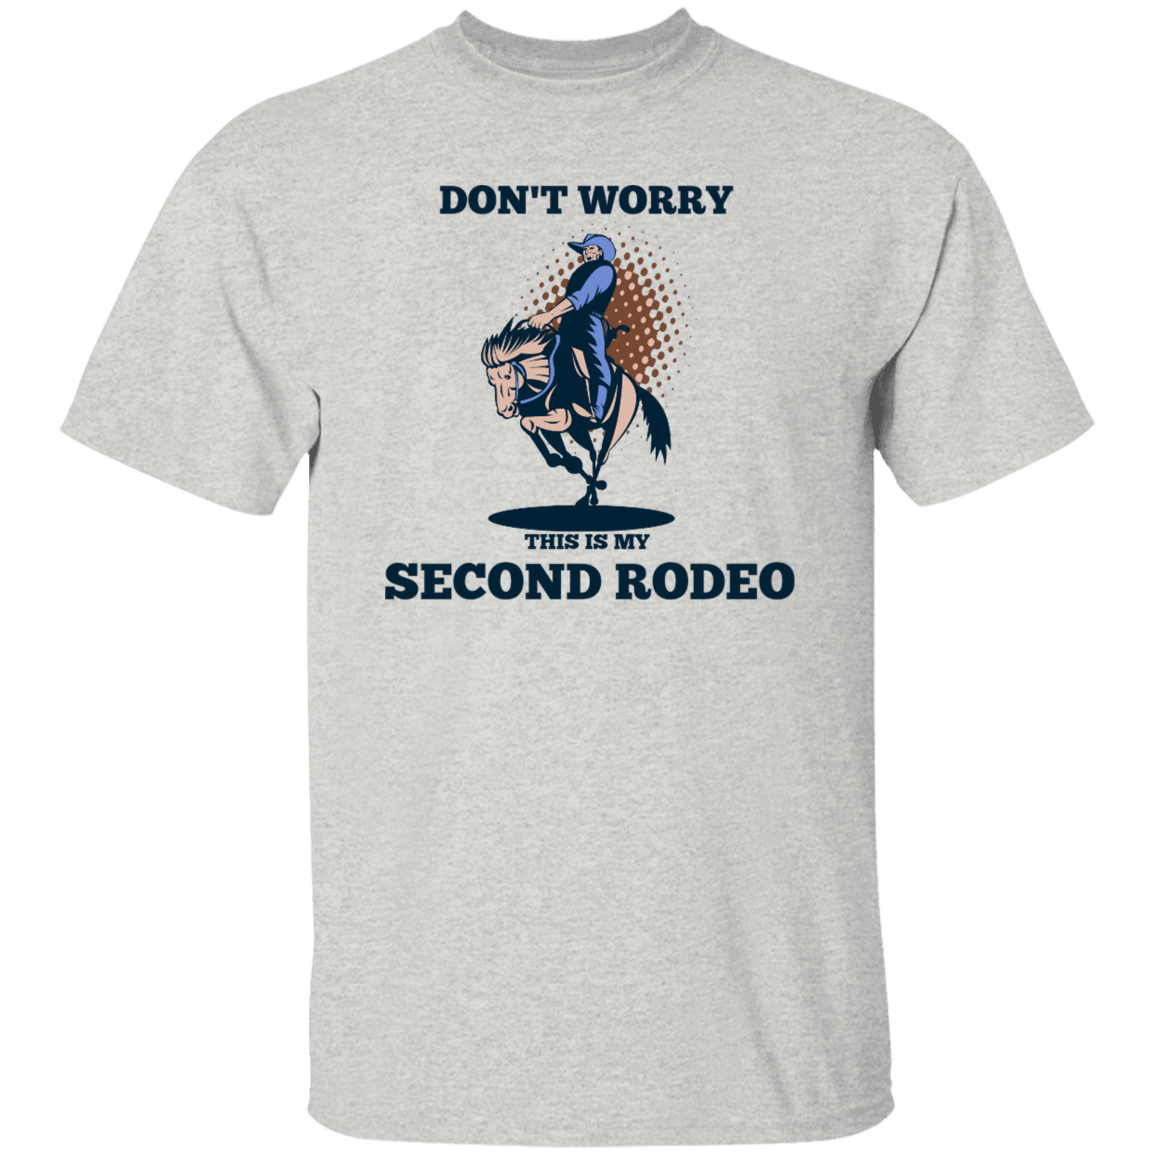 Second Rodeo T-Shirt